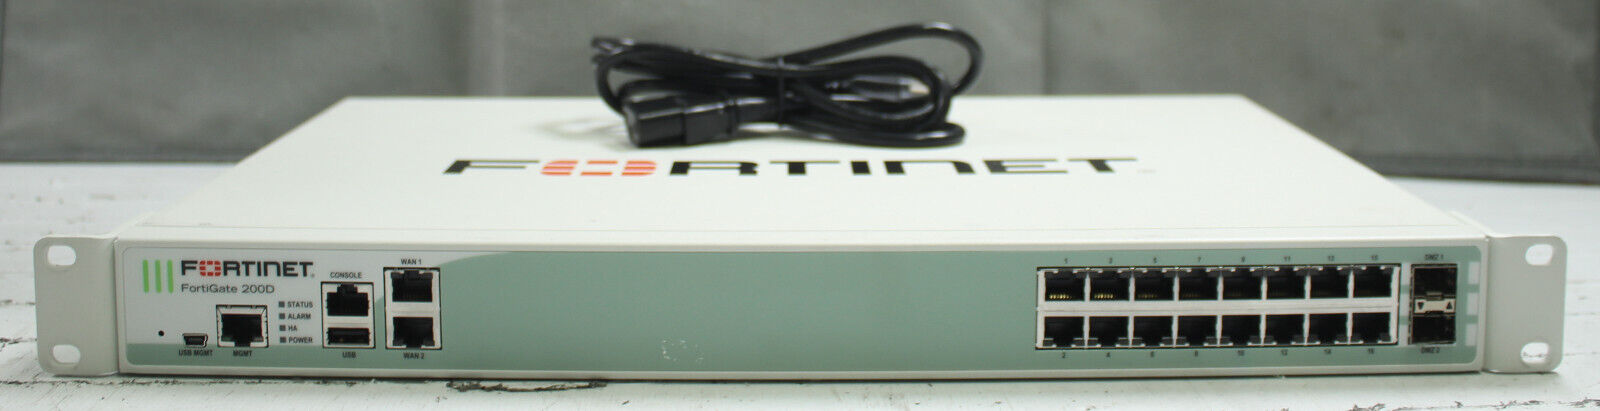 Fortinet FortiGate 200D FG-200D 16-Port Firewall Security with Power Cable